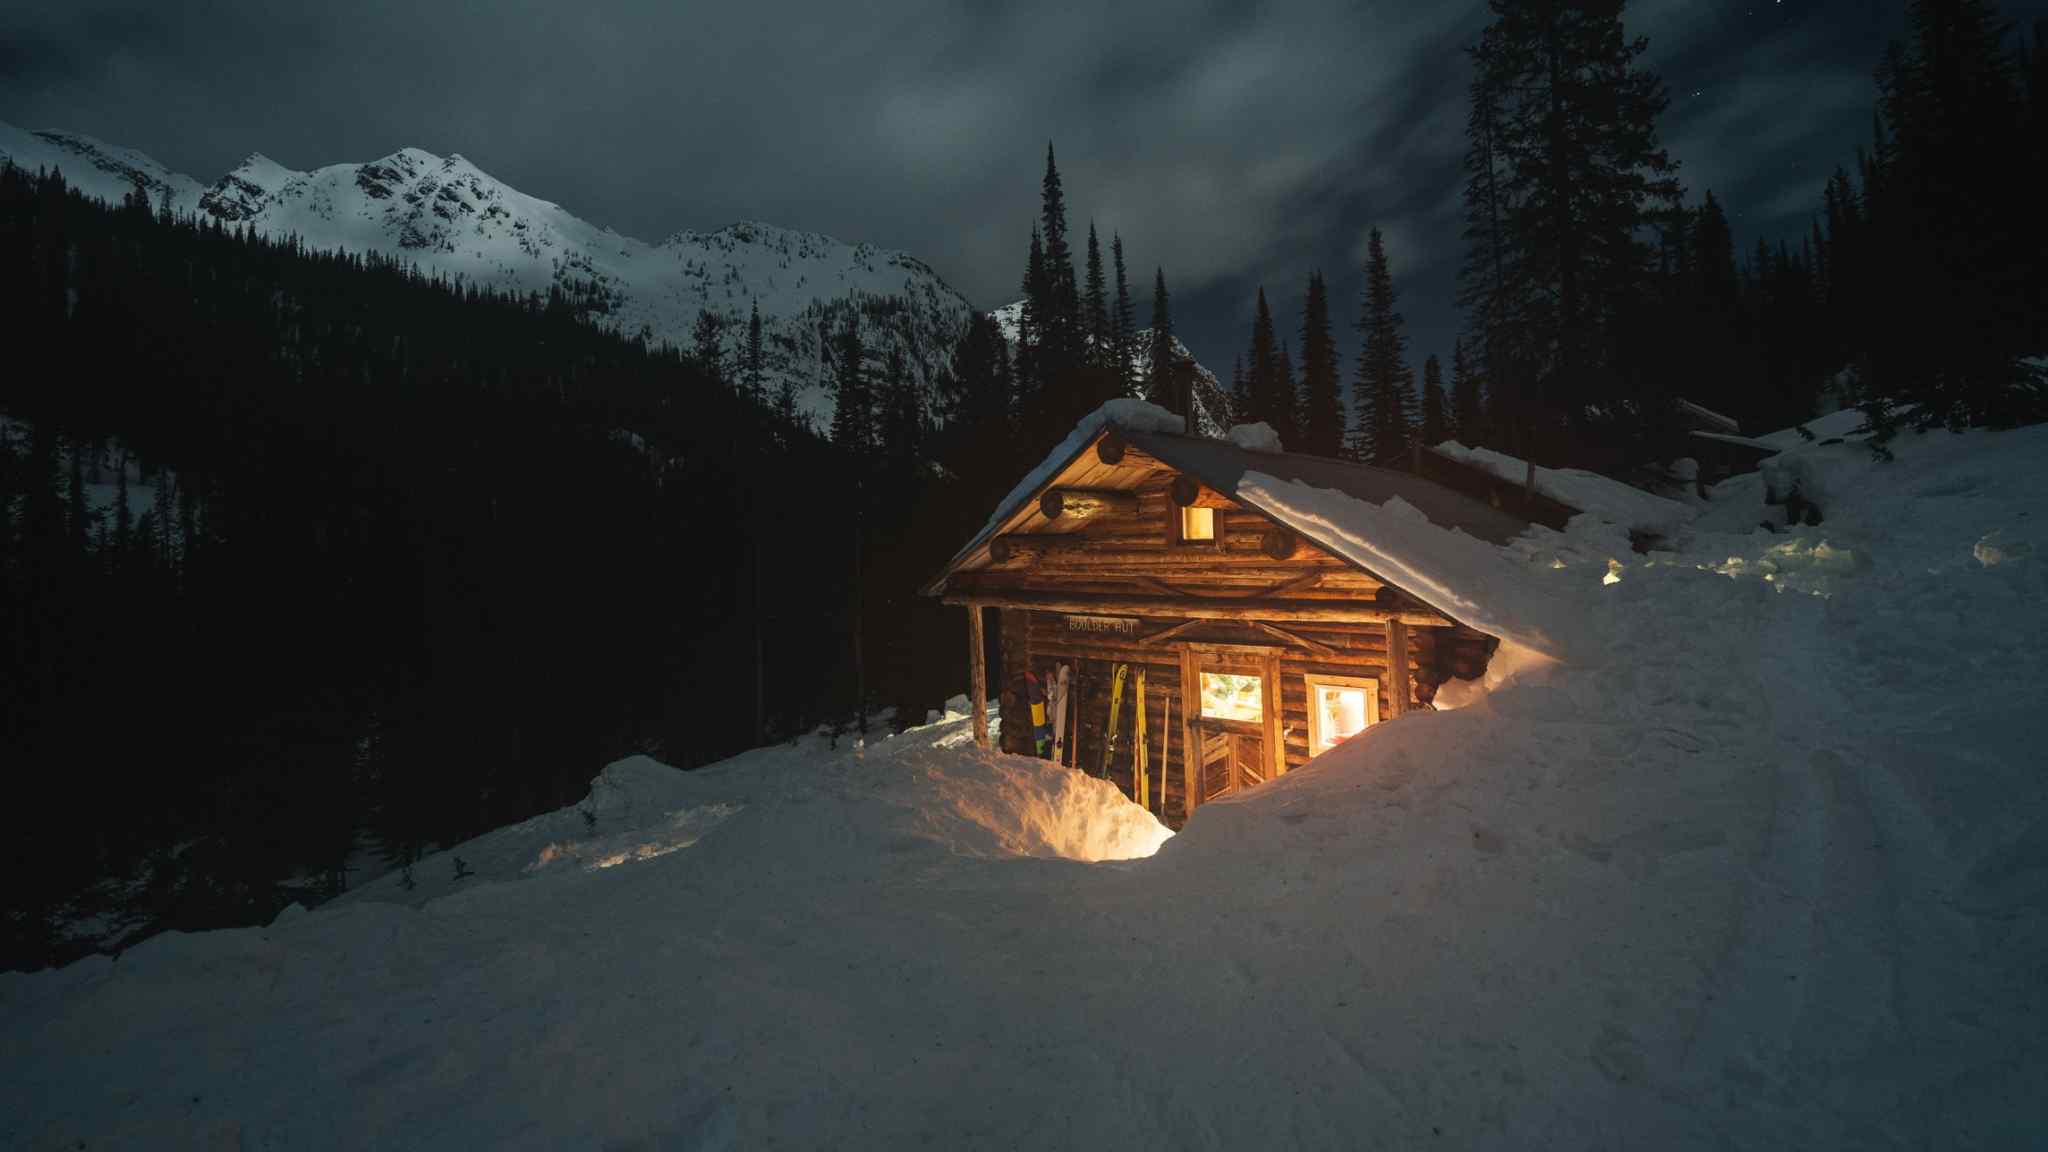 Deep in the Canadian wilderness, ski-touring heaven   